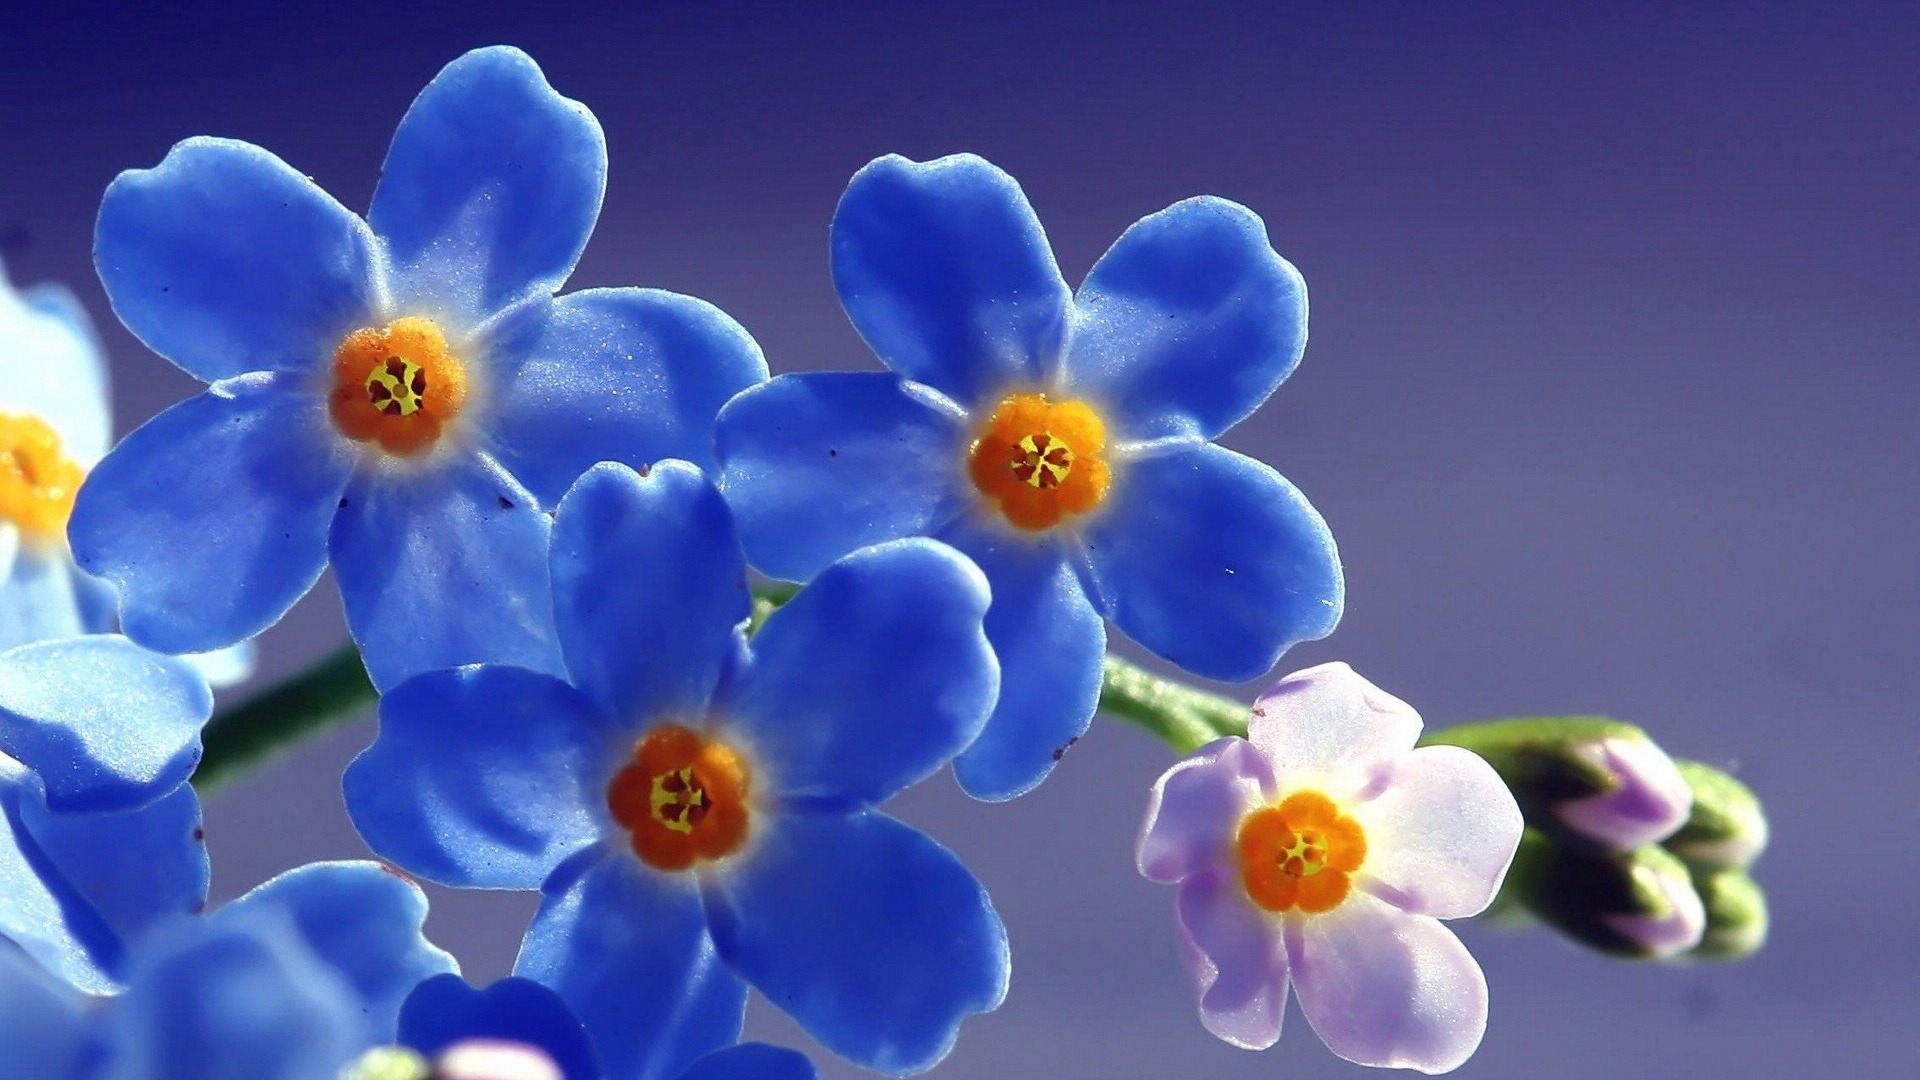 Small and beautiful forget-me-flowers HD wallpaper #19 - 1920x1080